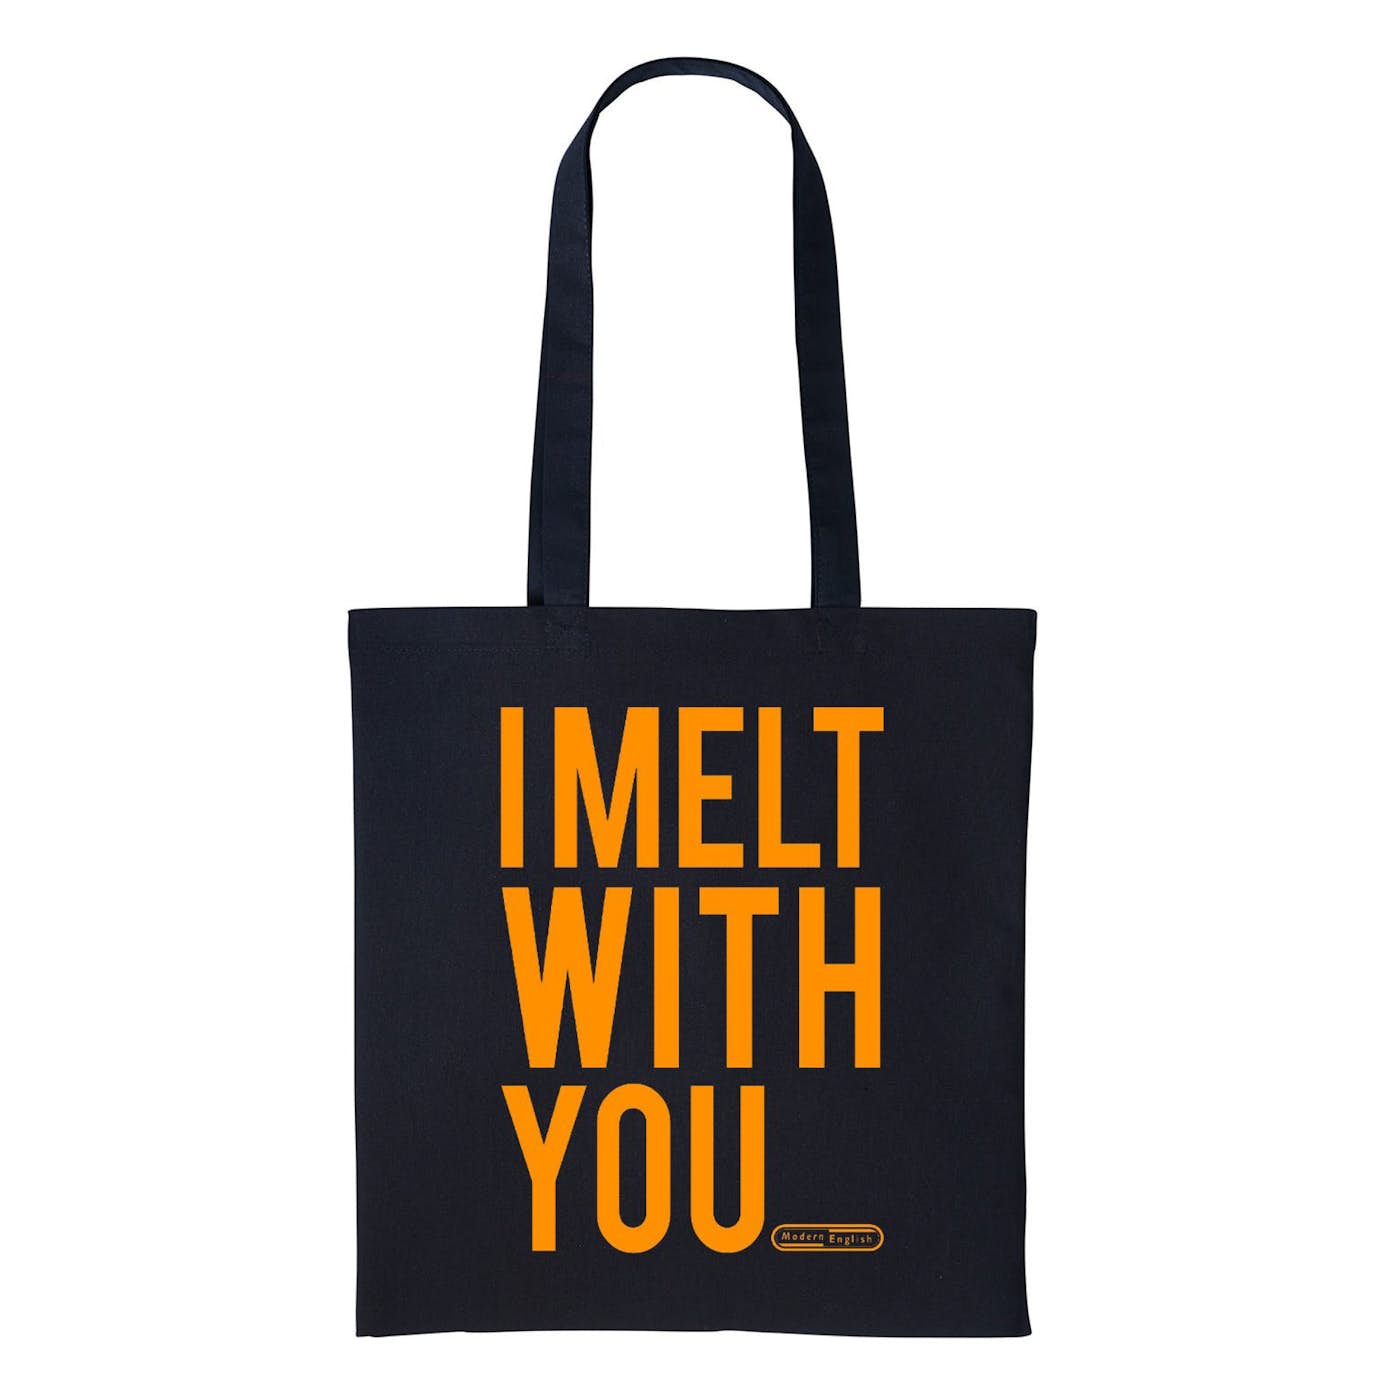 Modern English - I Melt With You Black Canvas Tote